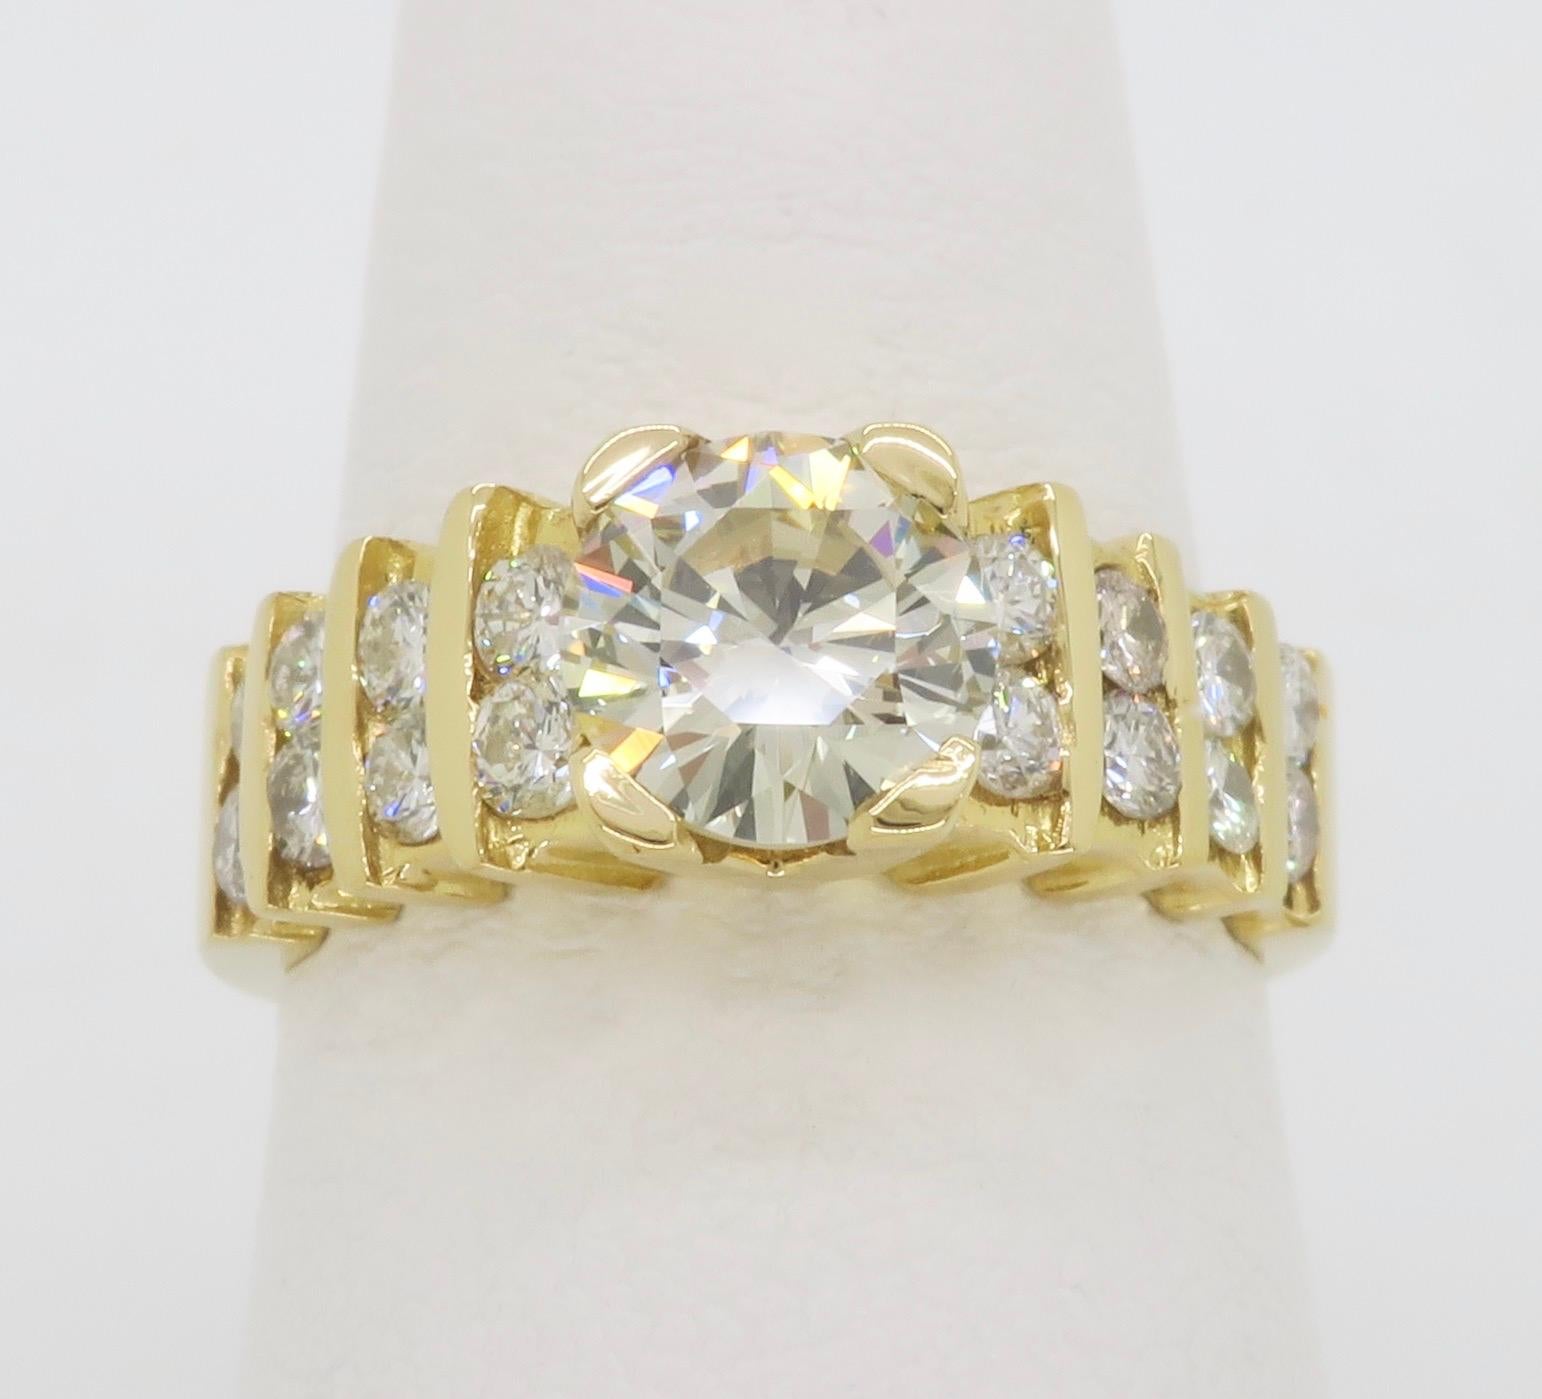 Diamond encrusted ring crafted in 14k Yellow Gold with 1.54ctw of Diamonds. 

Center Diamond Carat Weight: .98CT
Center Diamond Cut: Round Brilliant
Center Diamond Color: M
Center Diamond Clarity: VS1
Total Diamond Carat Weight: Approximately